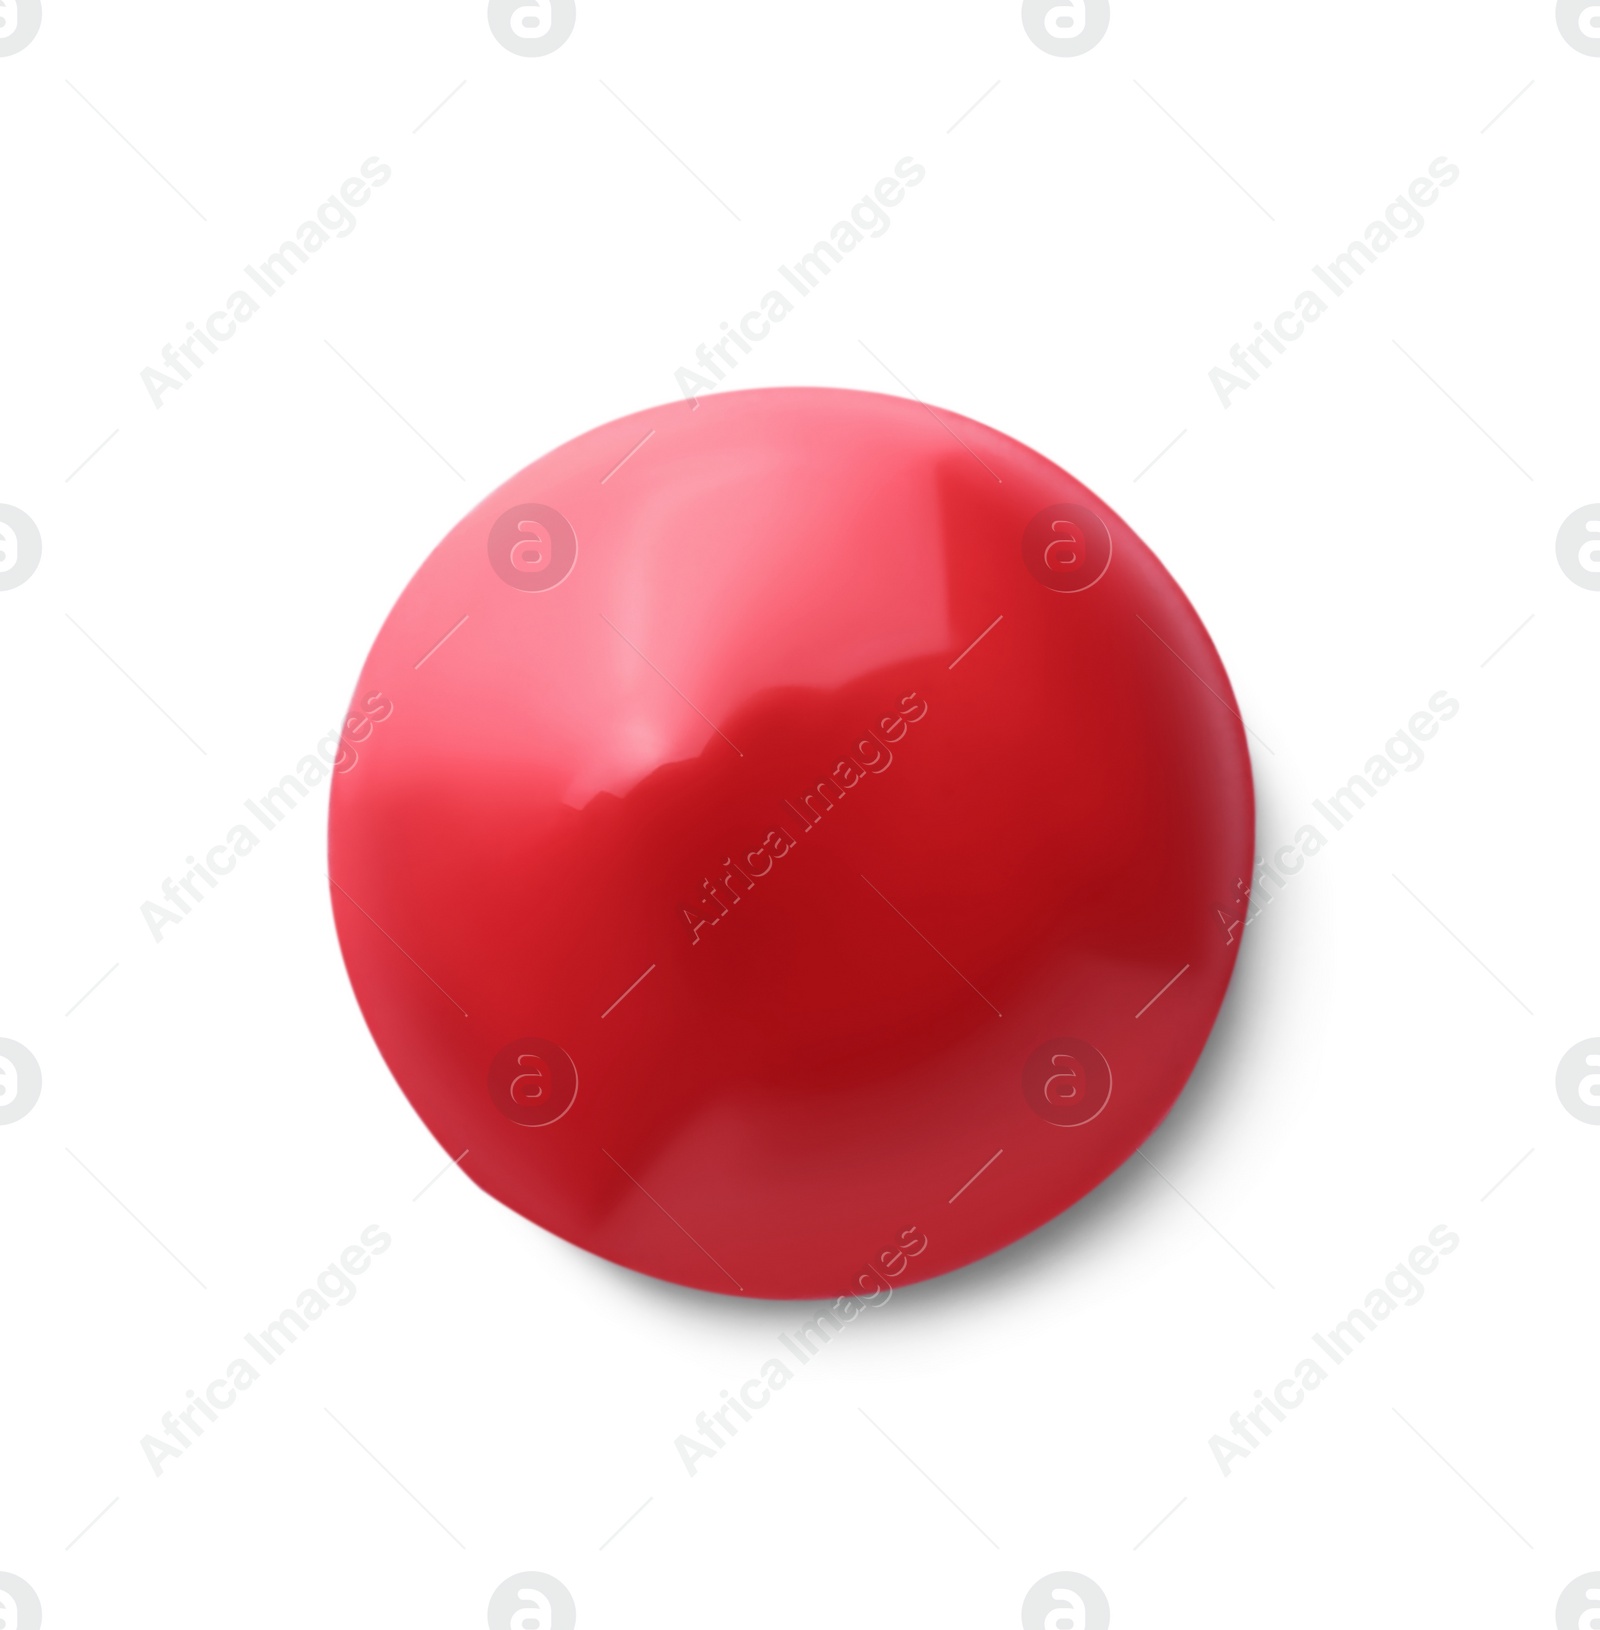 Photo of Sample of red paint on white background, top view